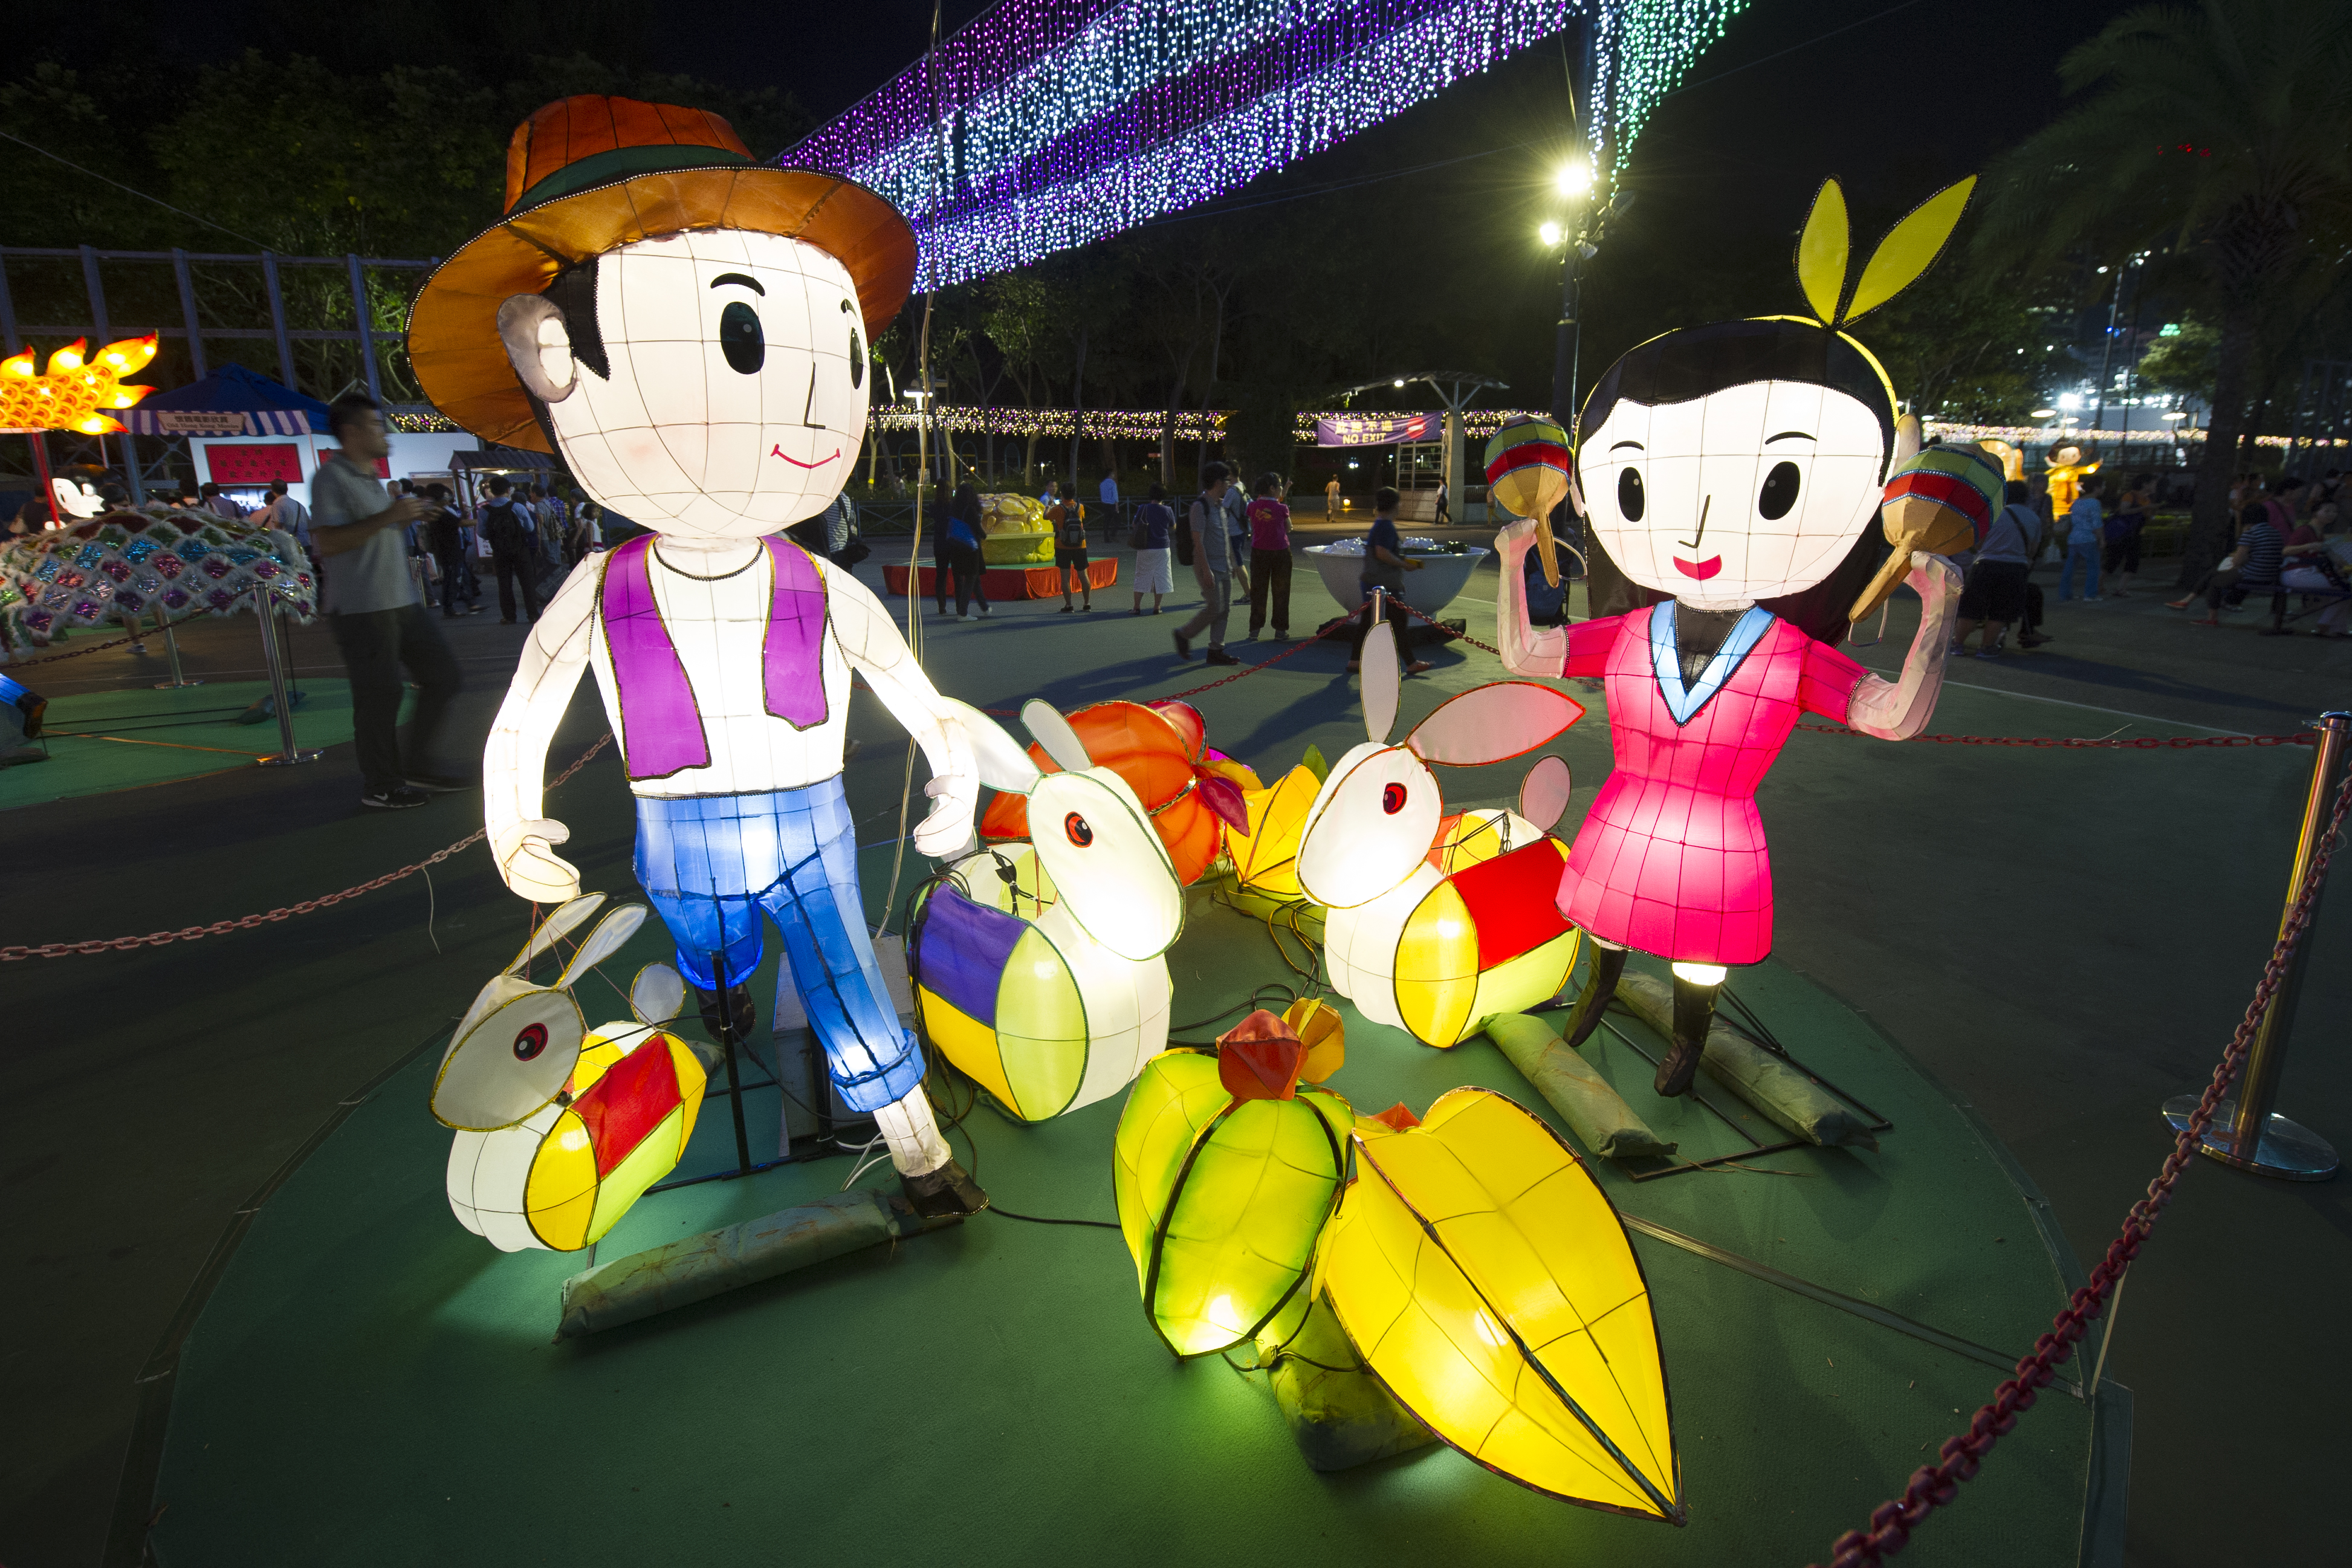 Light decorations are displayed as mid-autumn celebrations take place at dusk on Sept. 24, 2015, in Victoria Park in Hong Kong (Lucas Schifres—Getty Images)